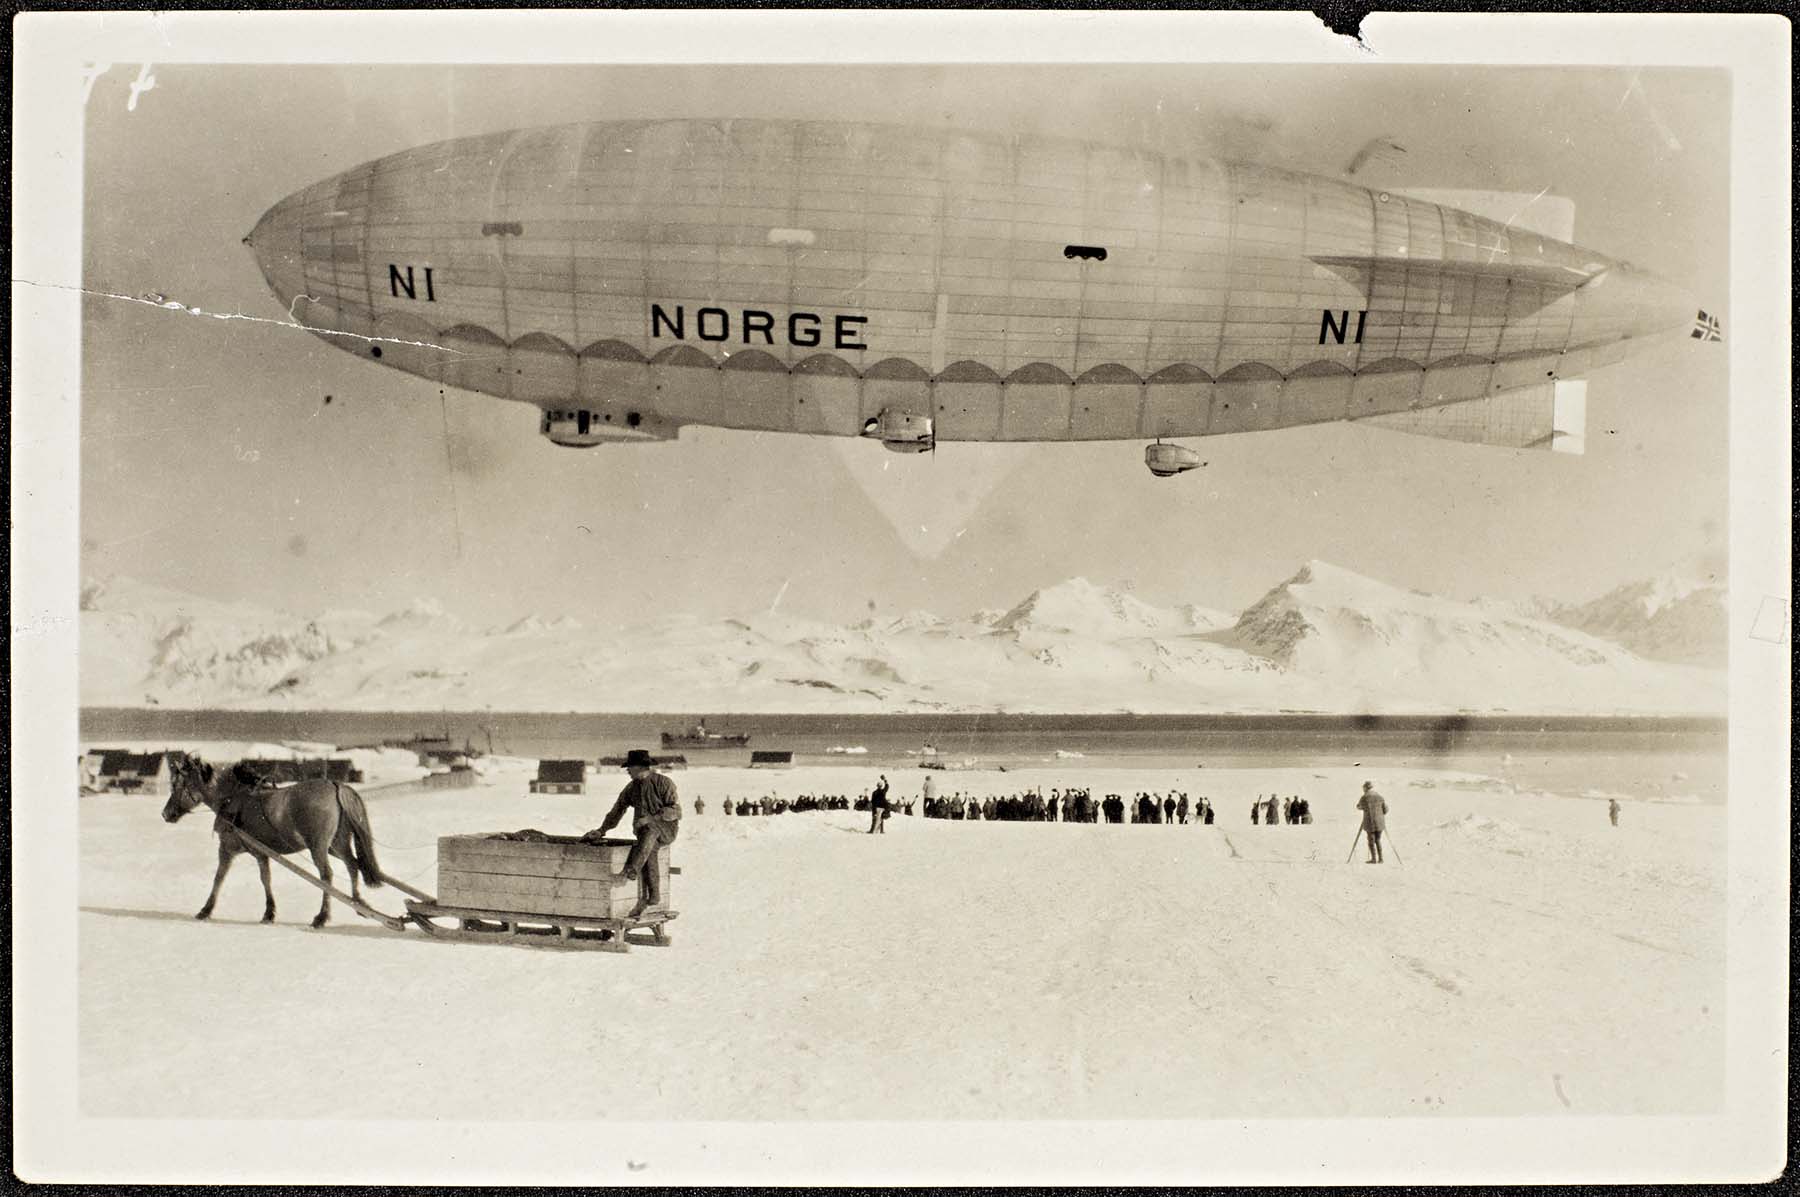 The Norge N1 airship over Ny-Ålesund on departure to the North Pole, 11 May 1926